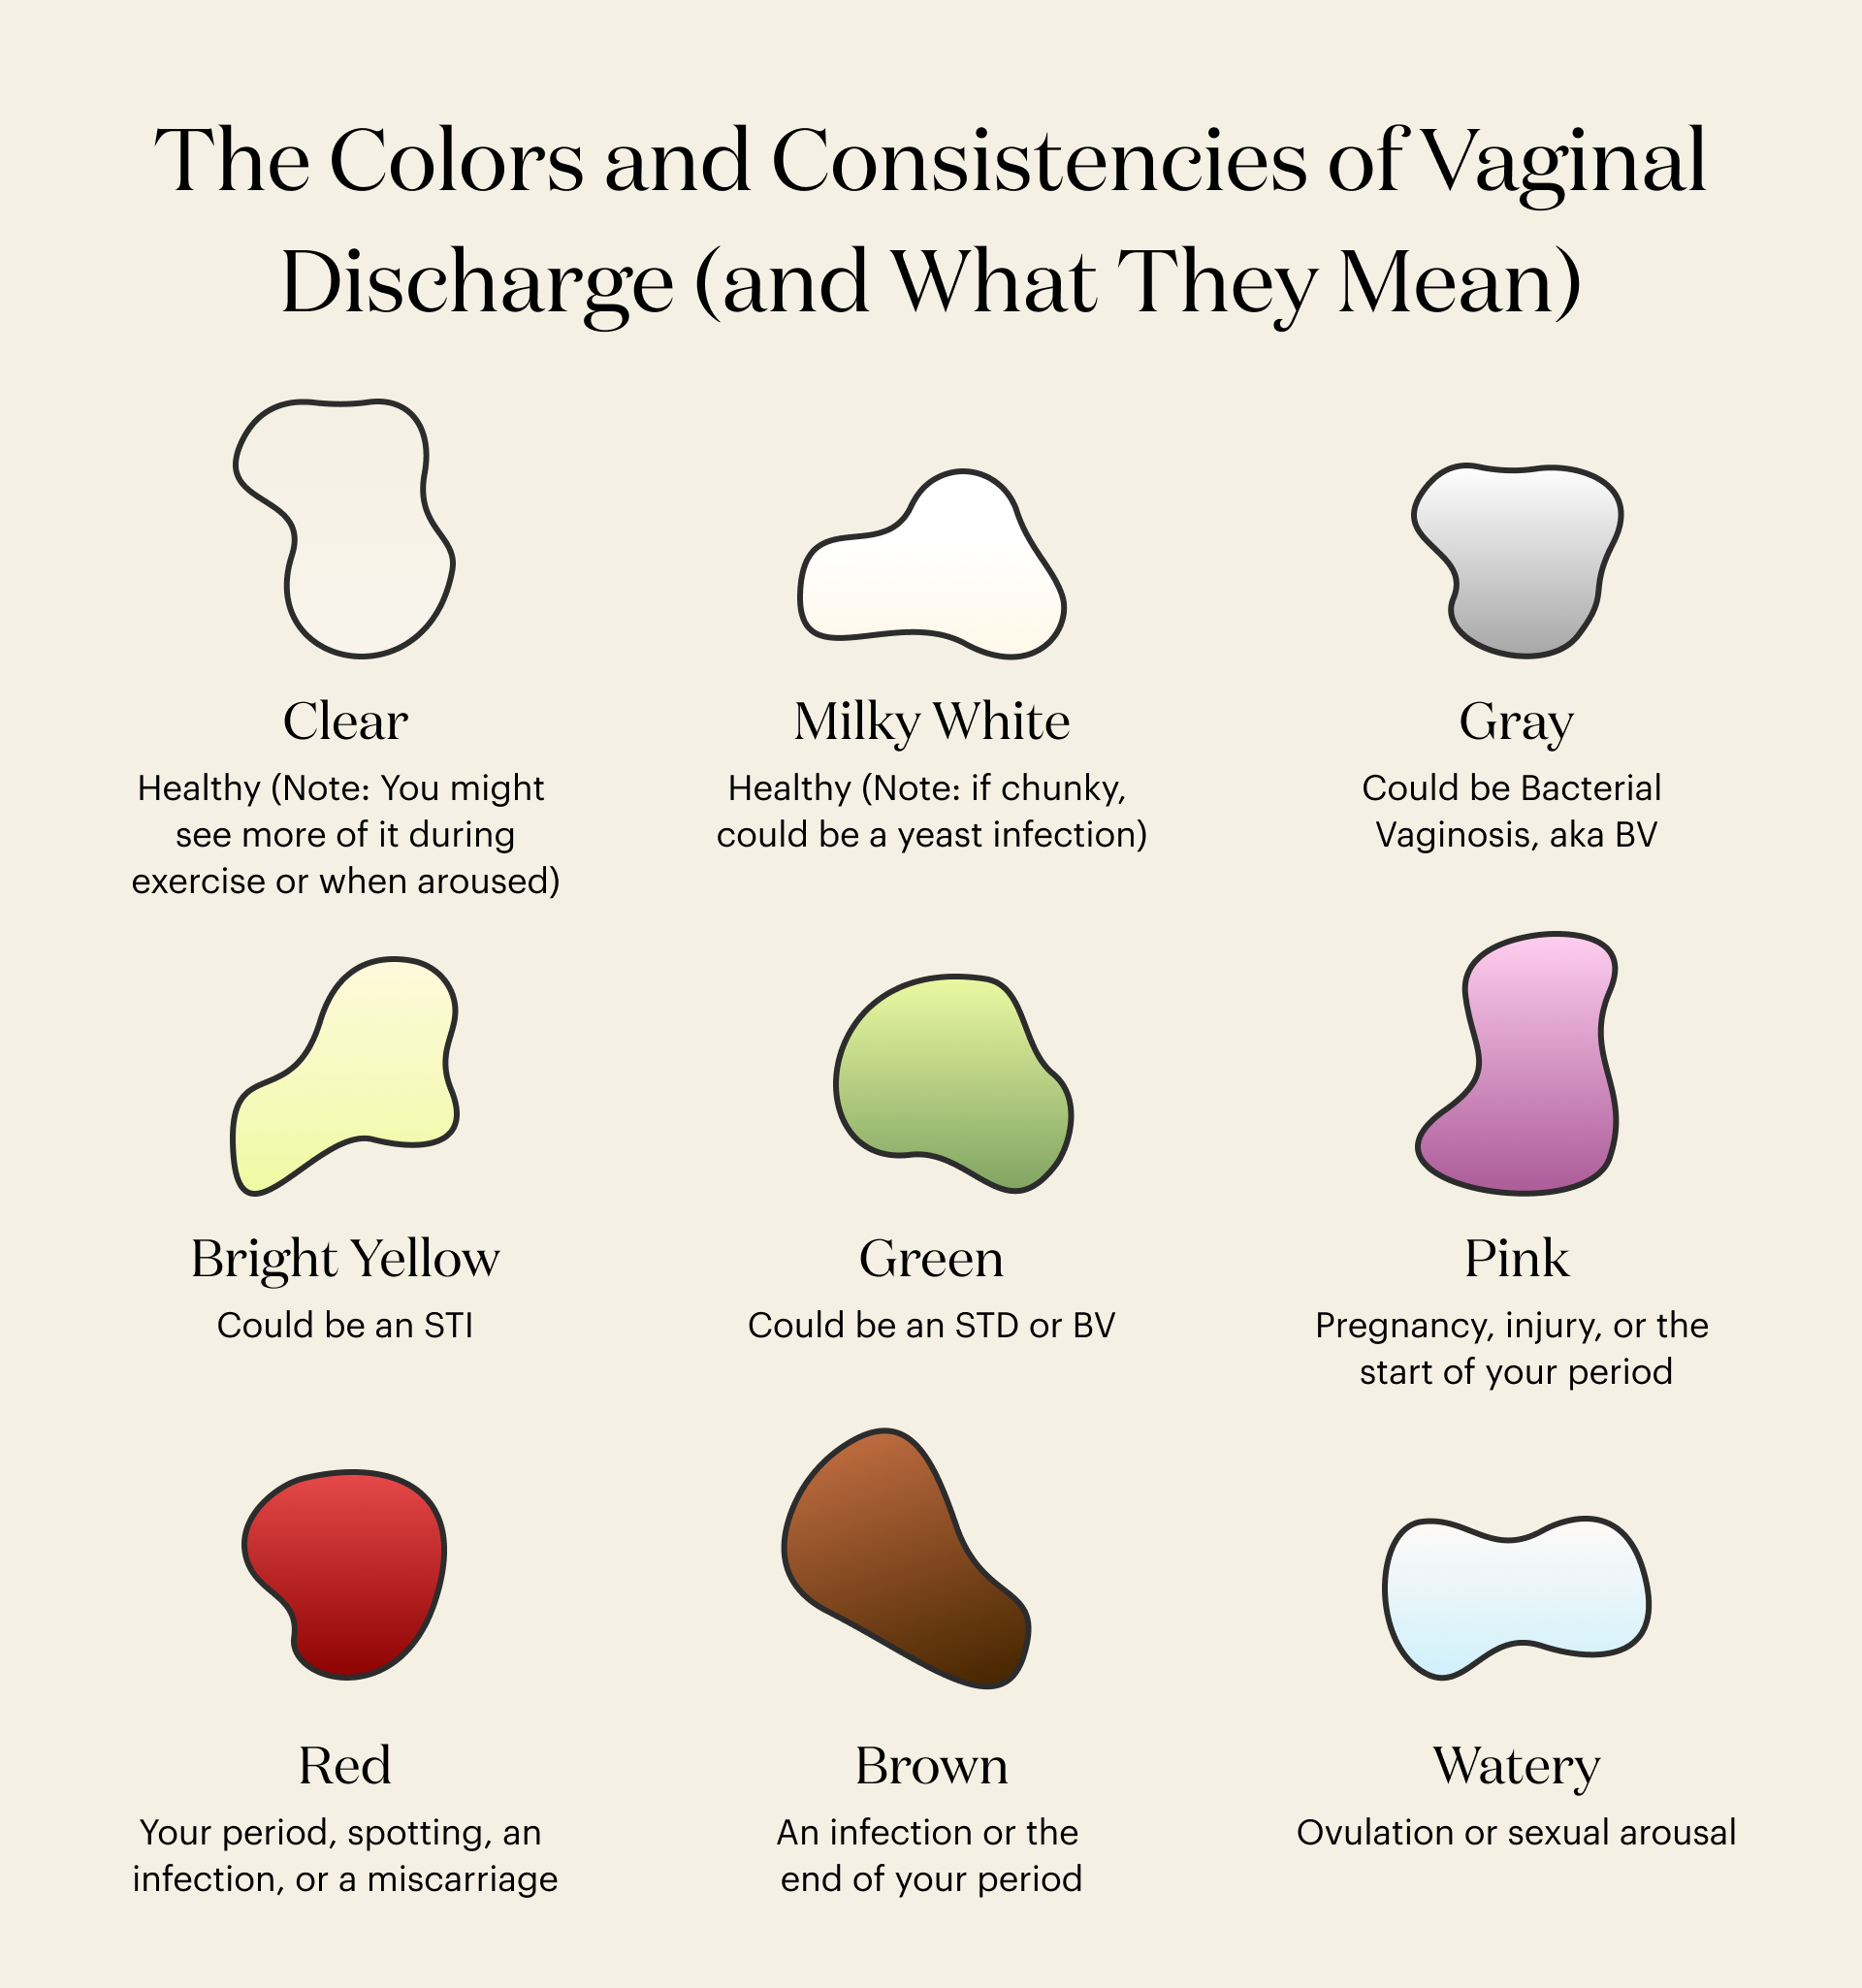 Menstrual blood can vary in color, texture, and consistency